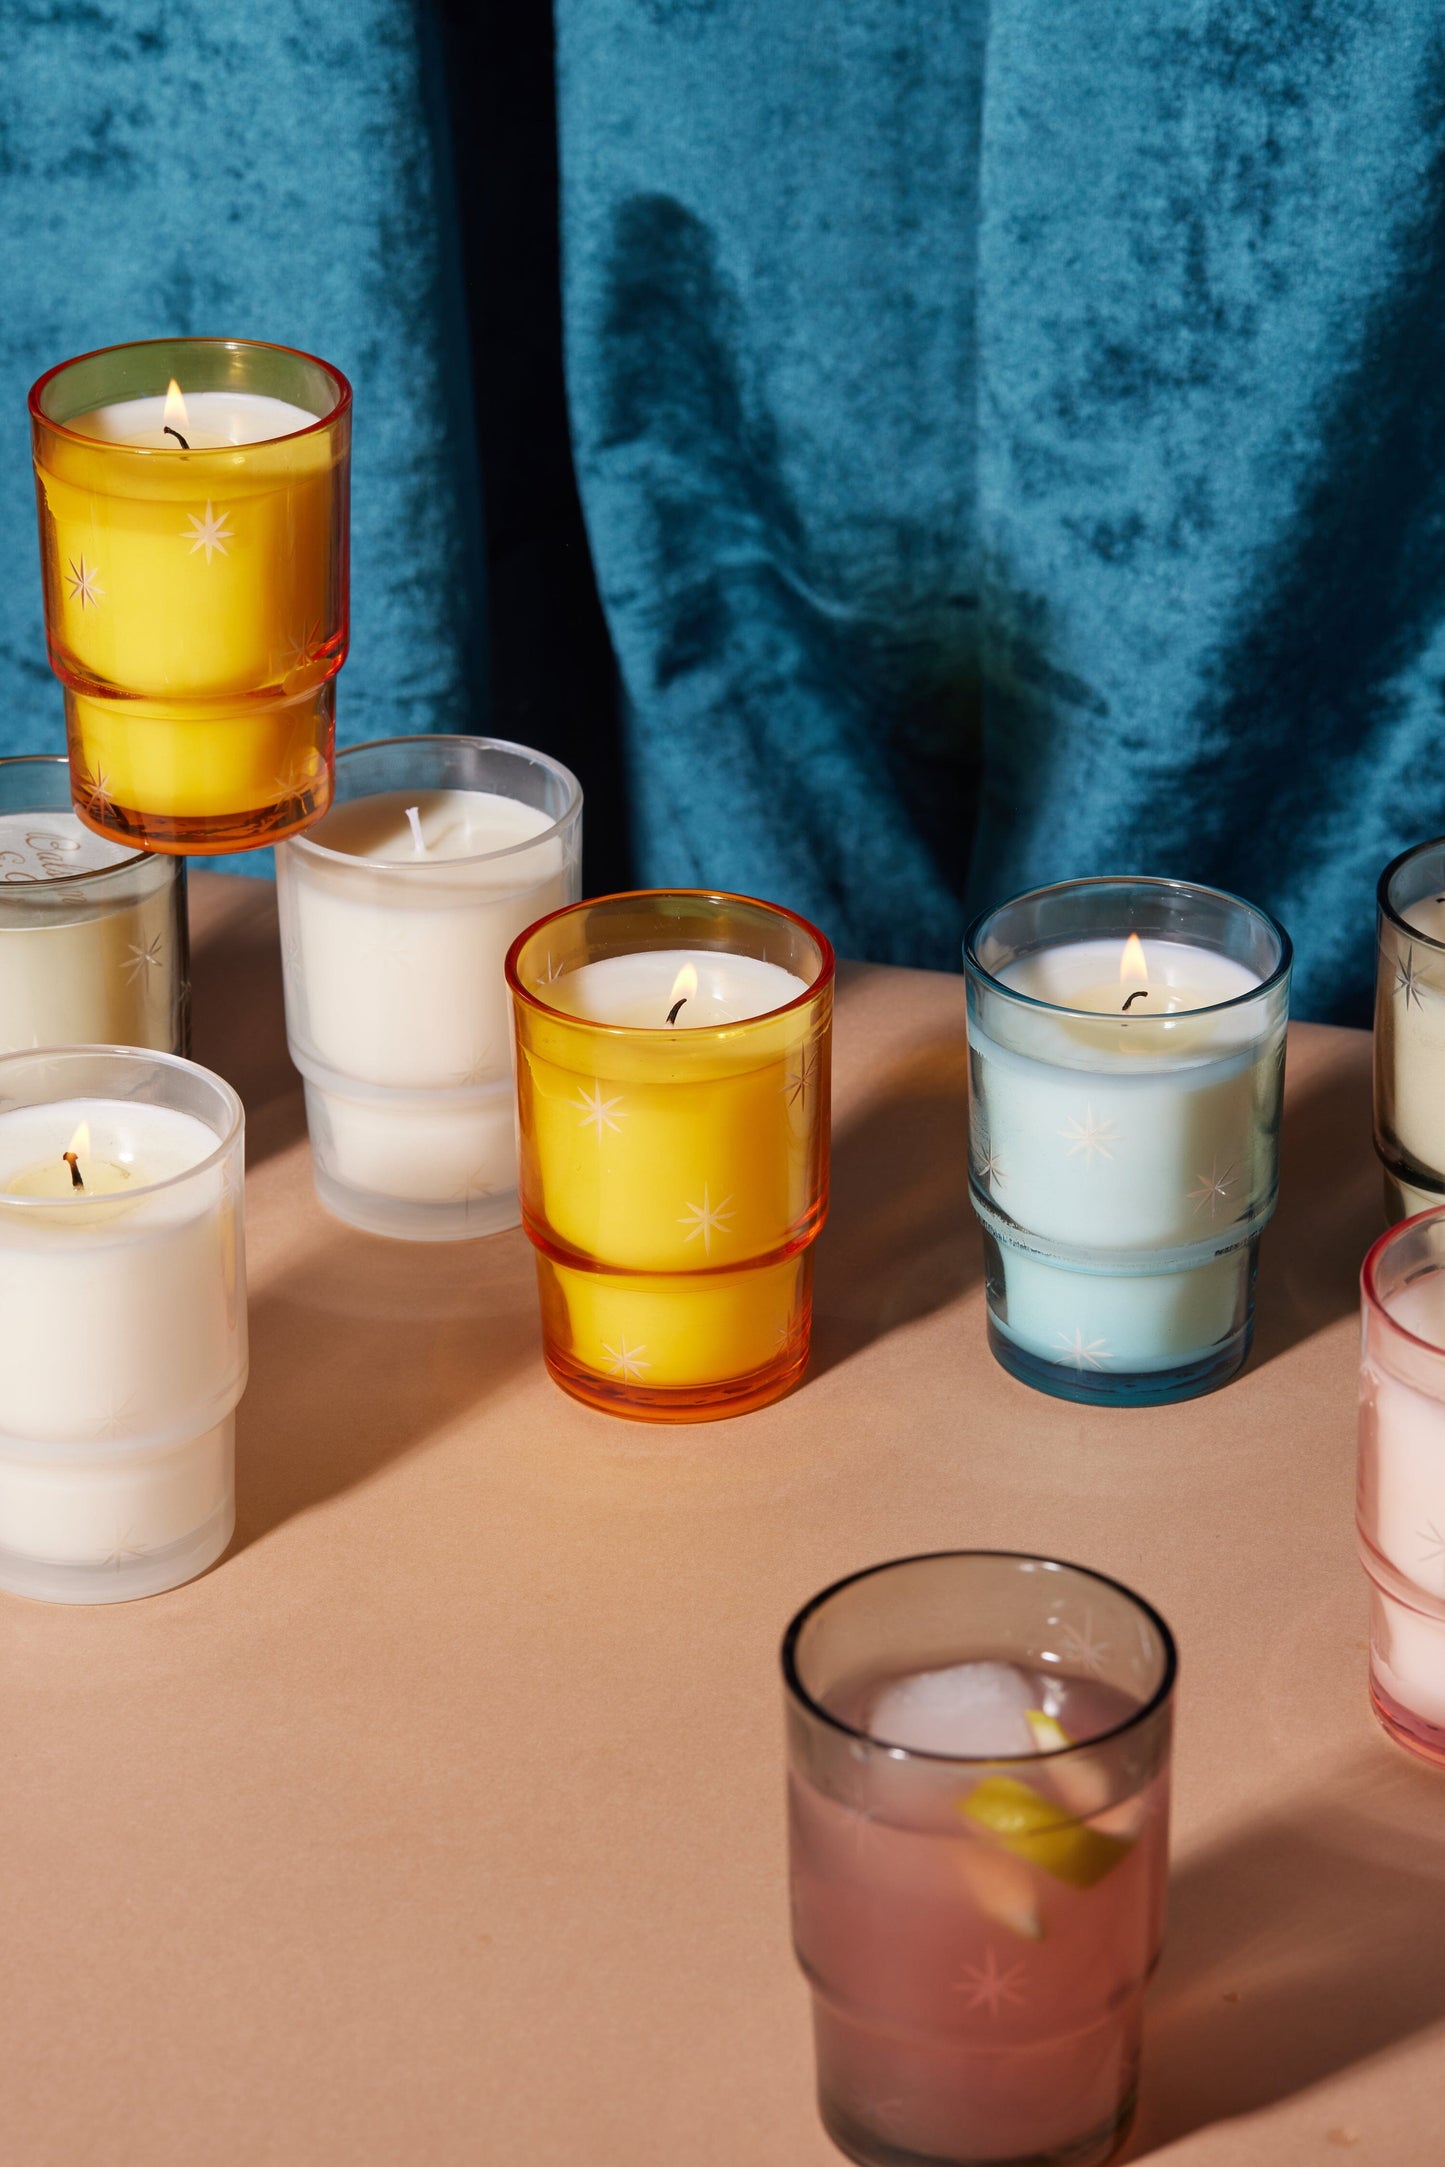 9 Candles in the photo.  Noel candles have 6 different varieties to choose from!  